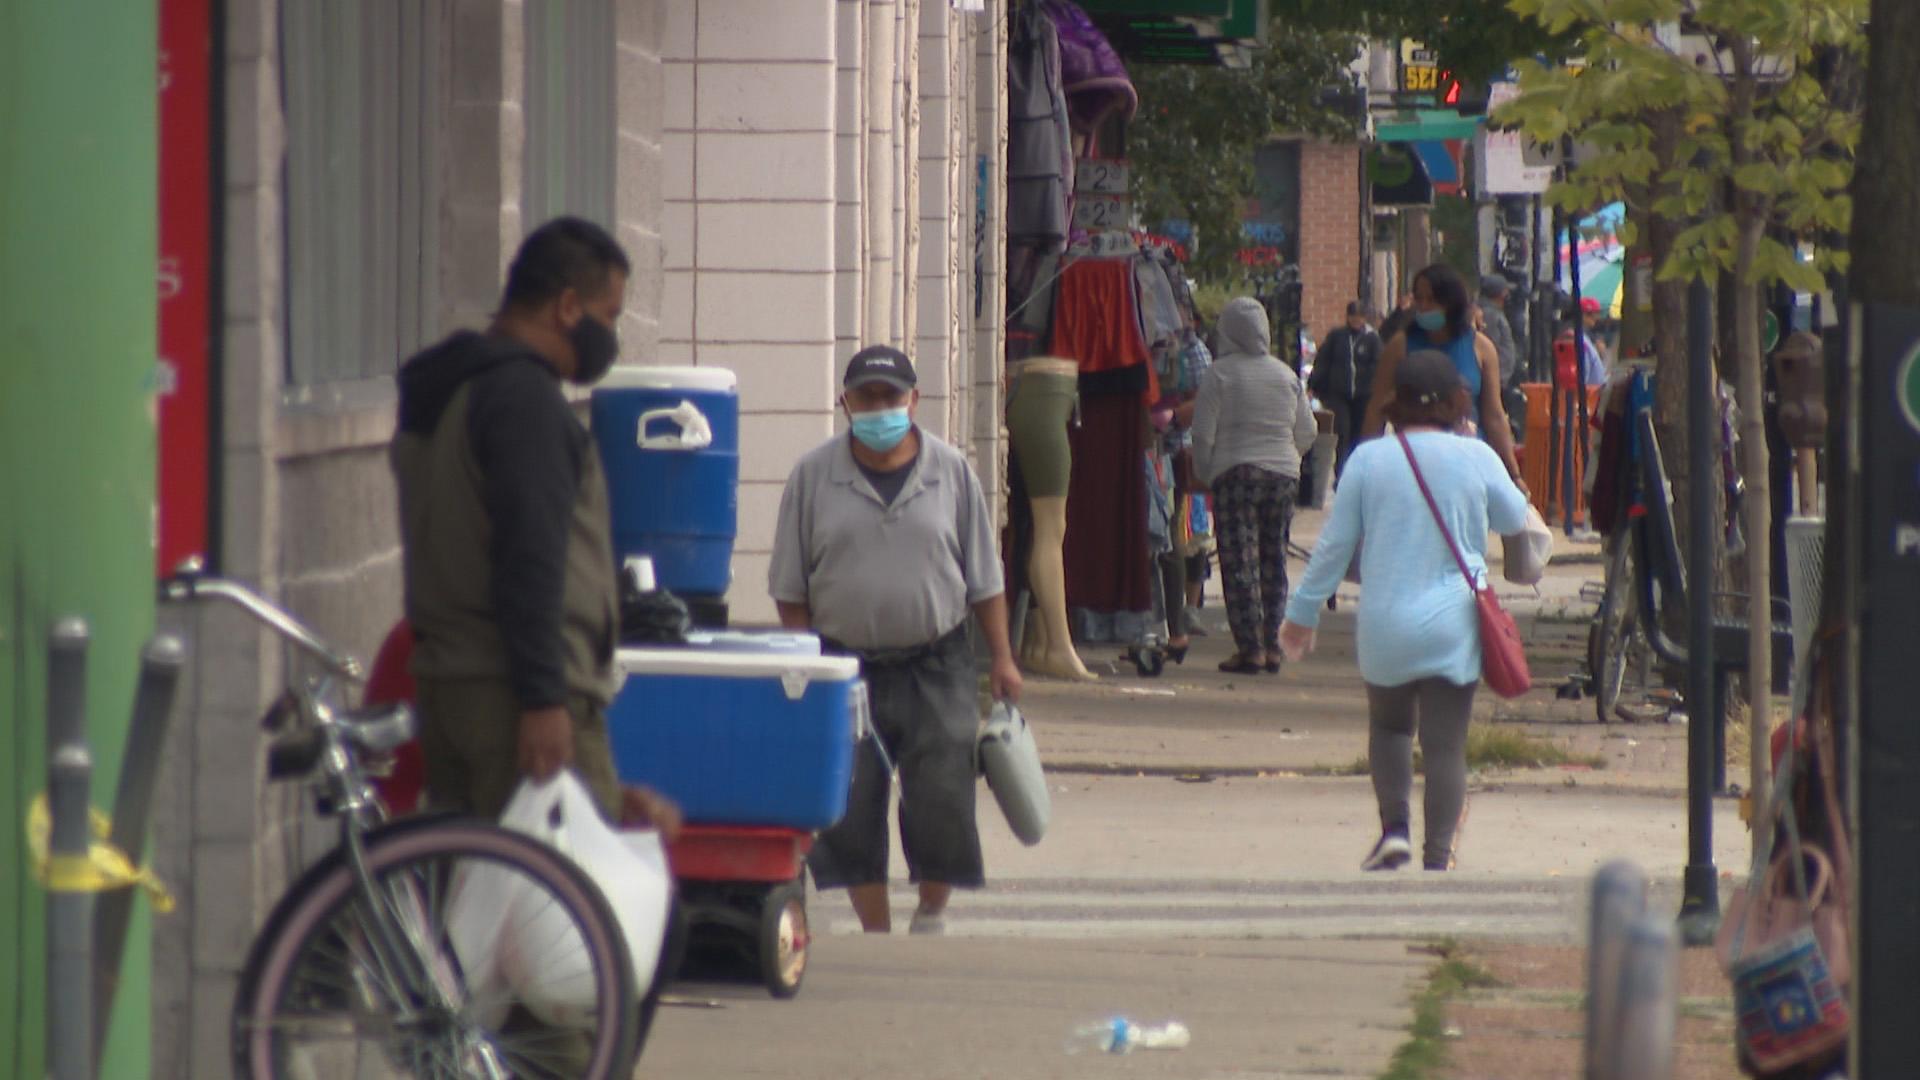 People wearing face masks walk in Chicago’s Albany Park neighborhood on Friday, Sept. 18, 2020, where a spate of recent shootings have added to concerns about public safety. (WTTW News)